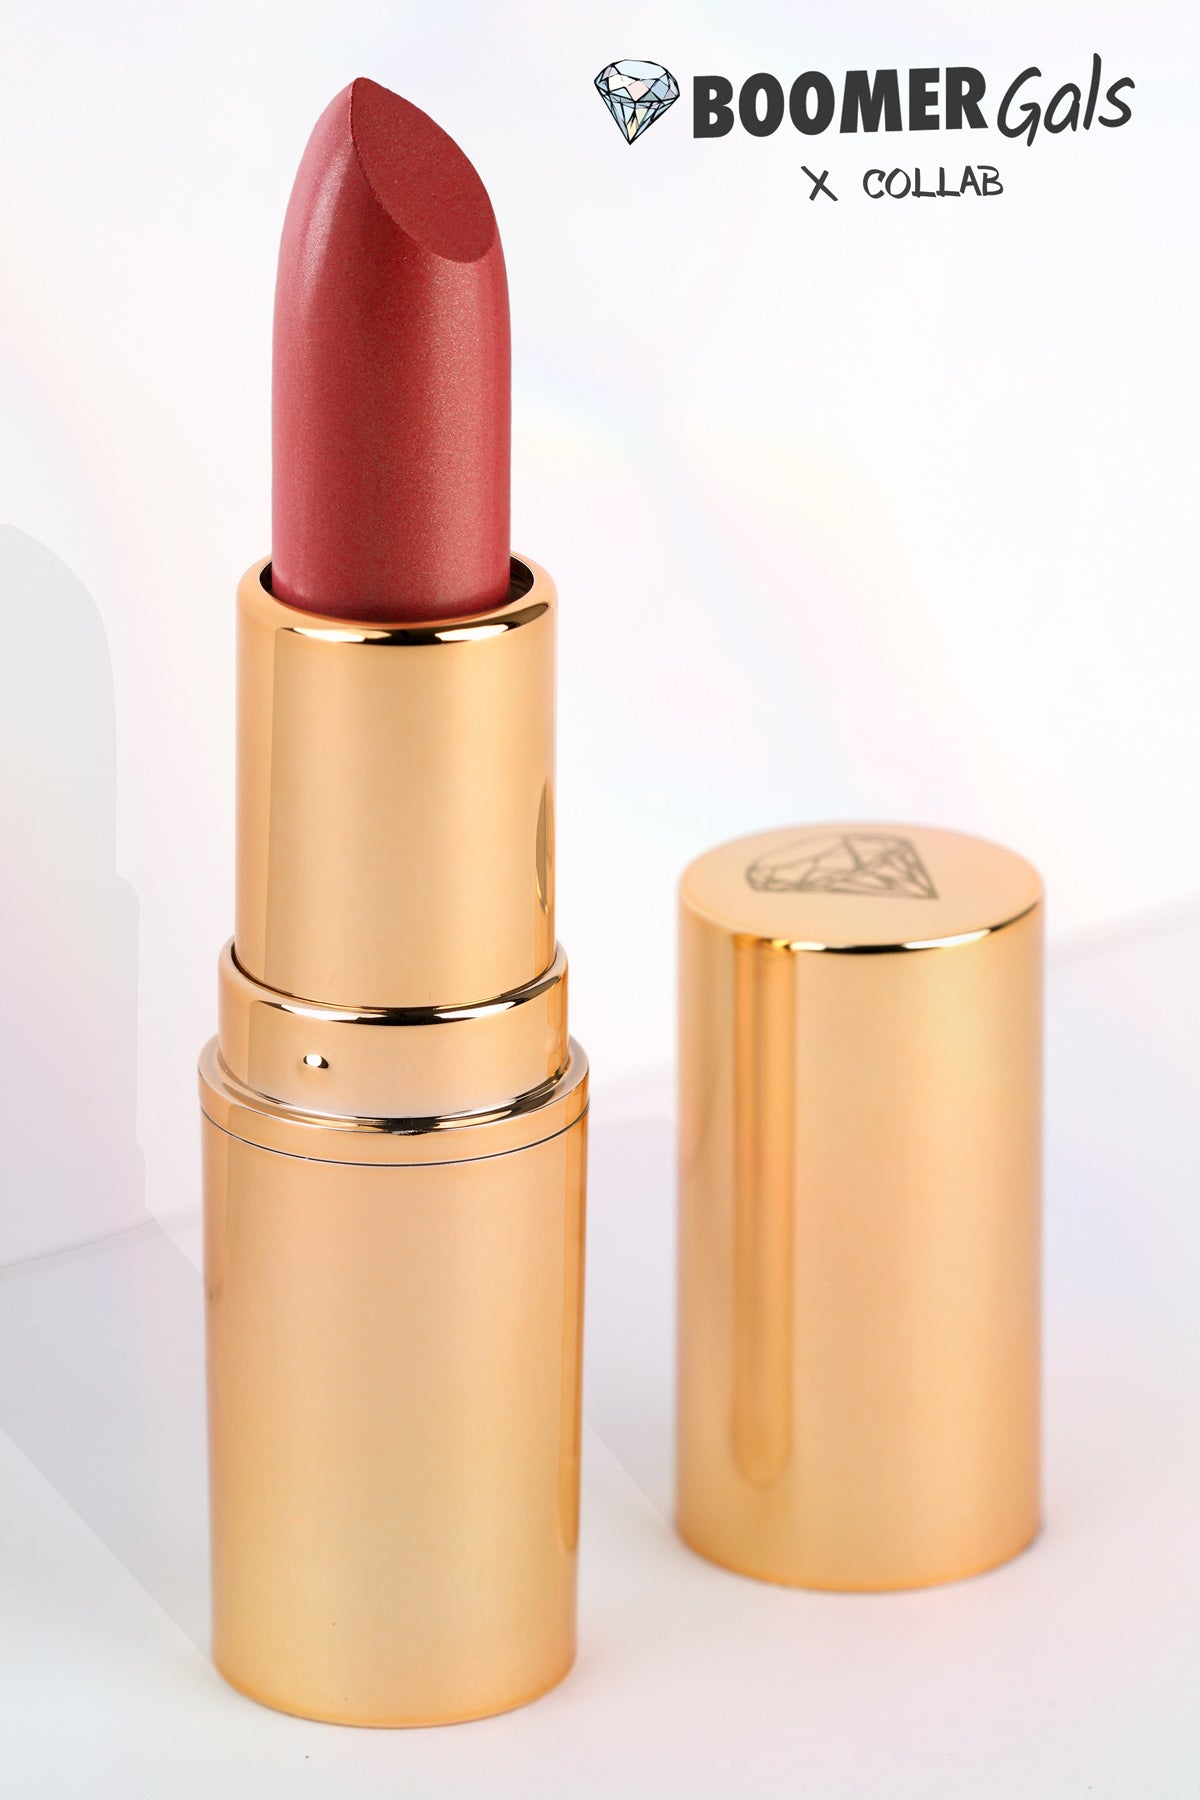 'Carol’s brick red with a shimmer' Boomer Gals - Ultra Lux Hydrating Lipstick